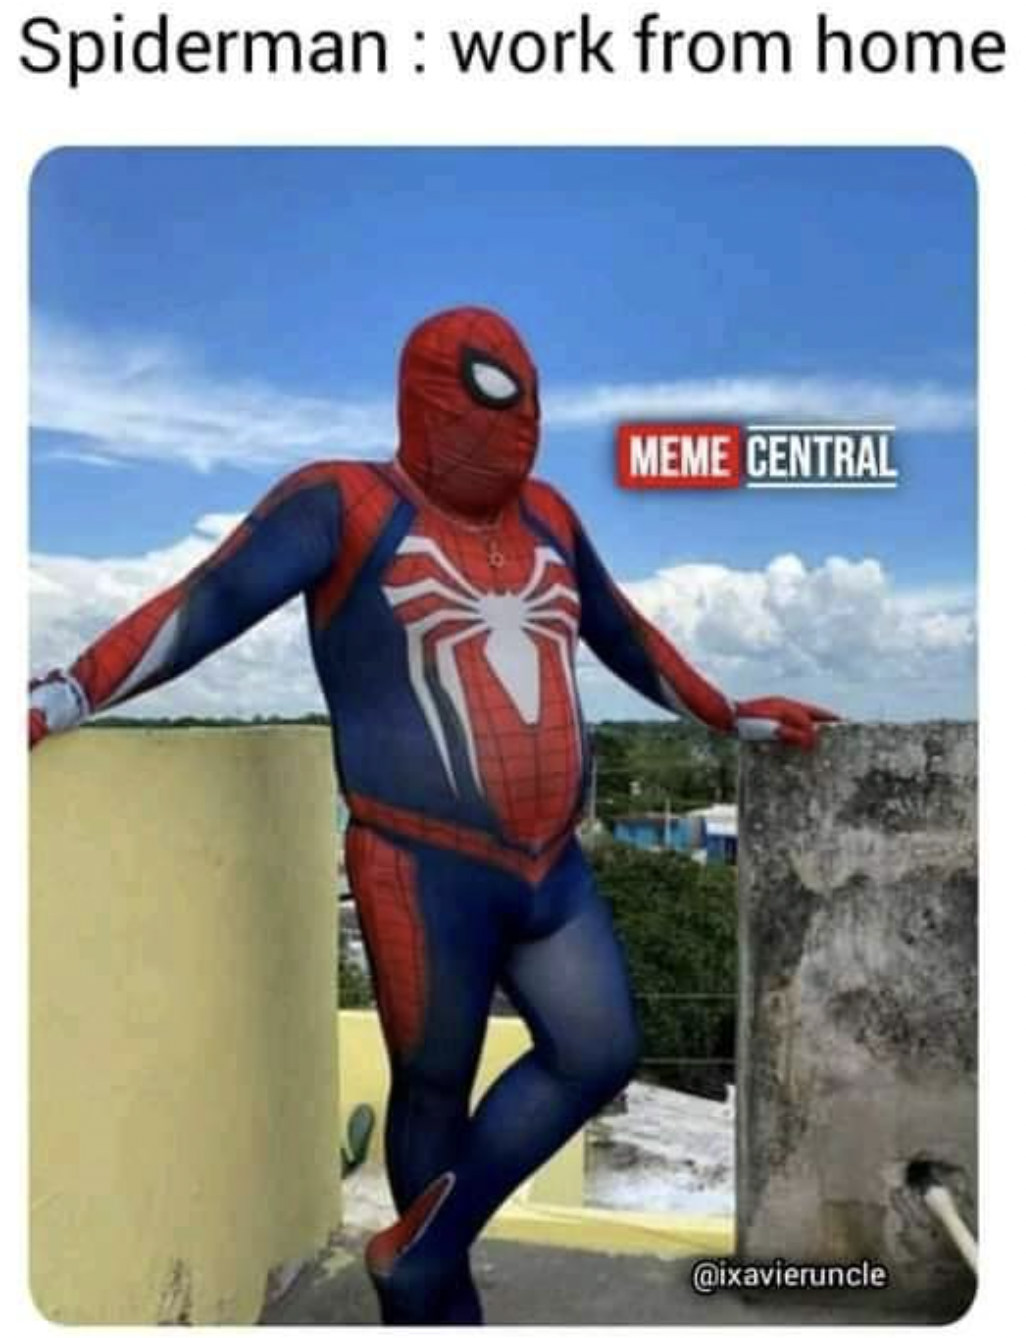 Spider-Man PS4 Memes - spider man from nani home - Spiderman work from home Meme Central